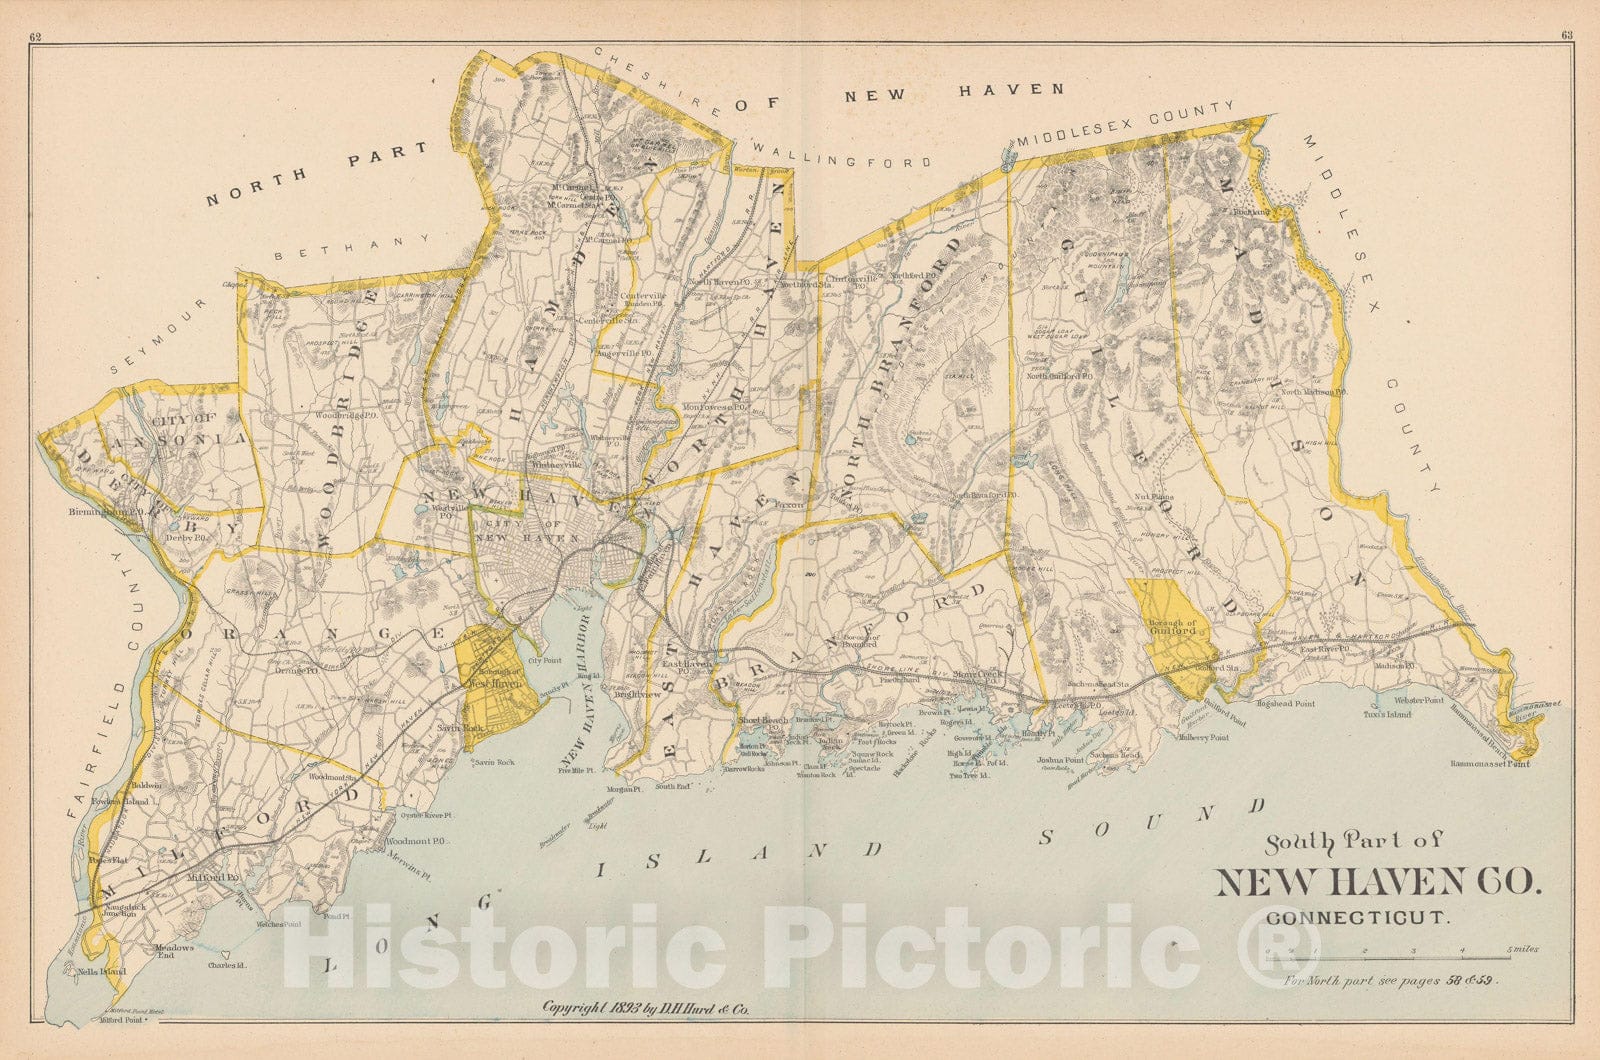 Historic Map : New Haven 1893 , Town and City Atlas State of Connecticut , v3, Vintage Wall Art